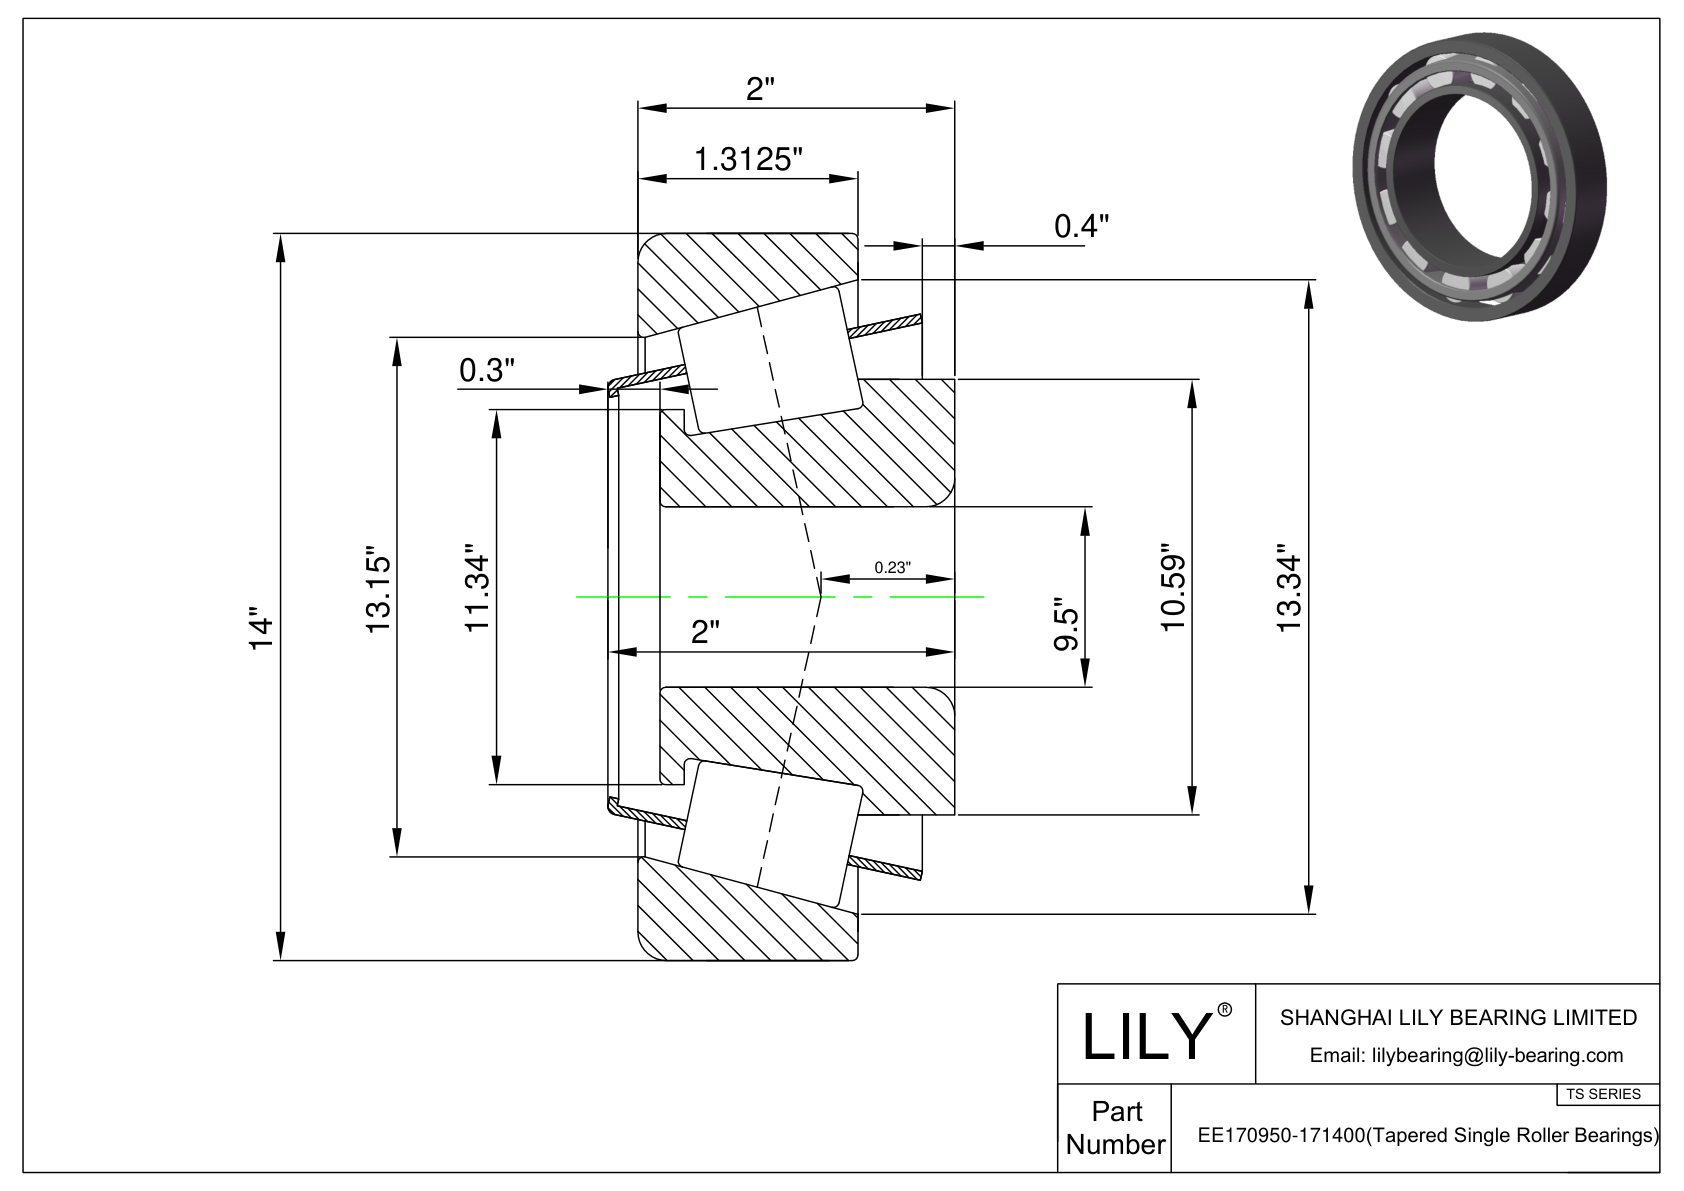 EE170950-171400 TS (Tapered Single Roller Bearings) (Imperial) cad drawing